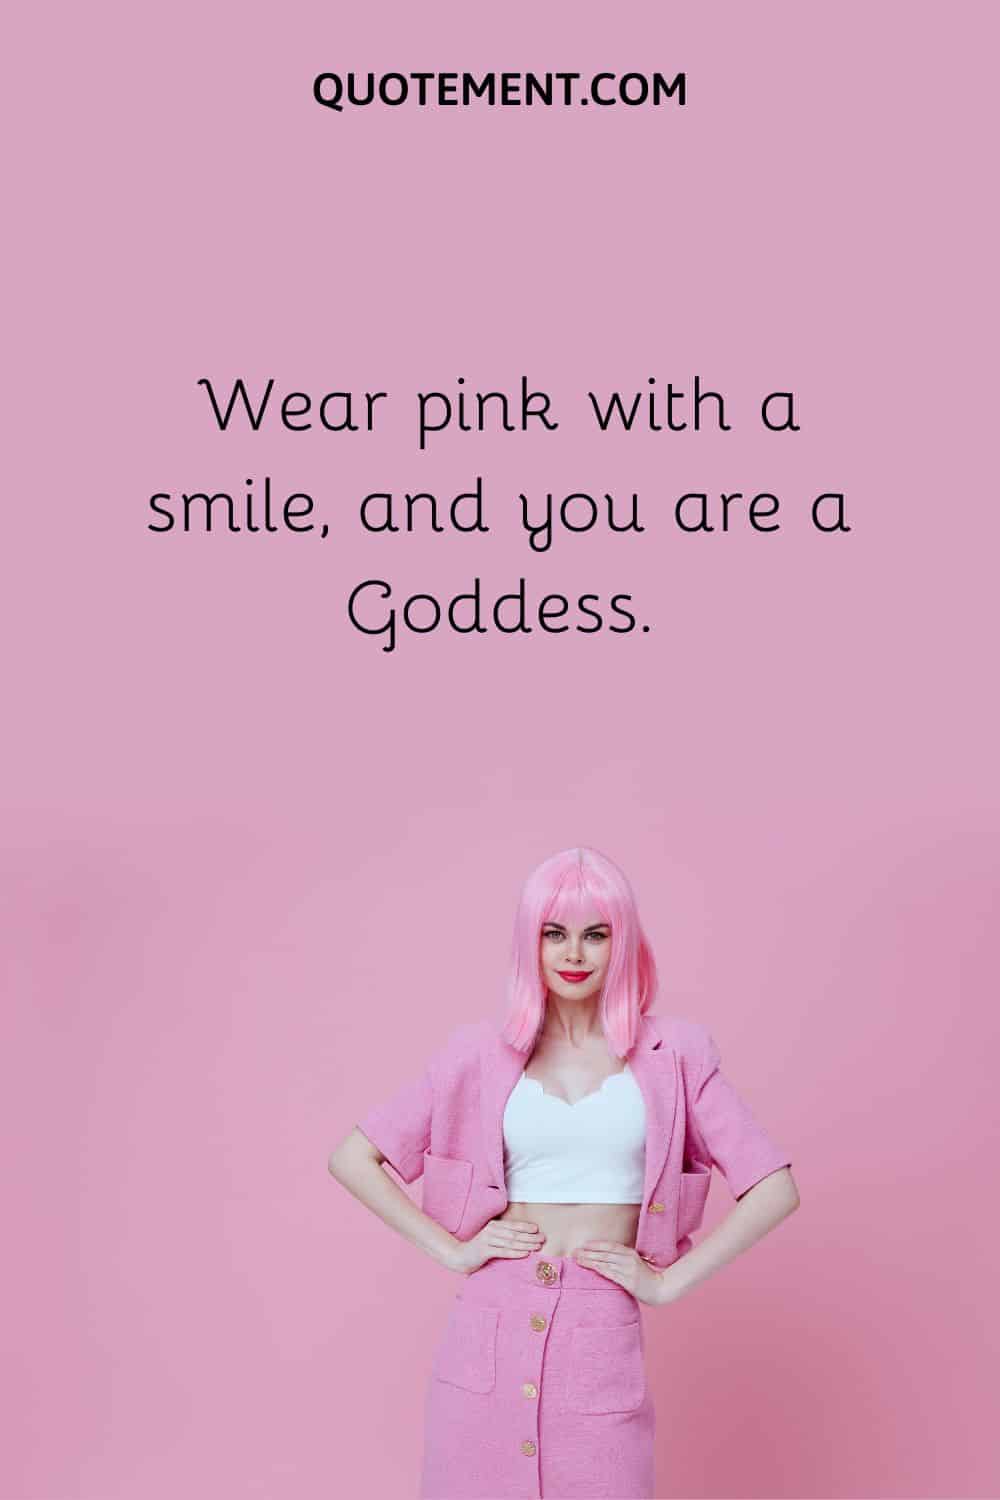 Wear pink with a smile, and you are a Goddess.
